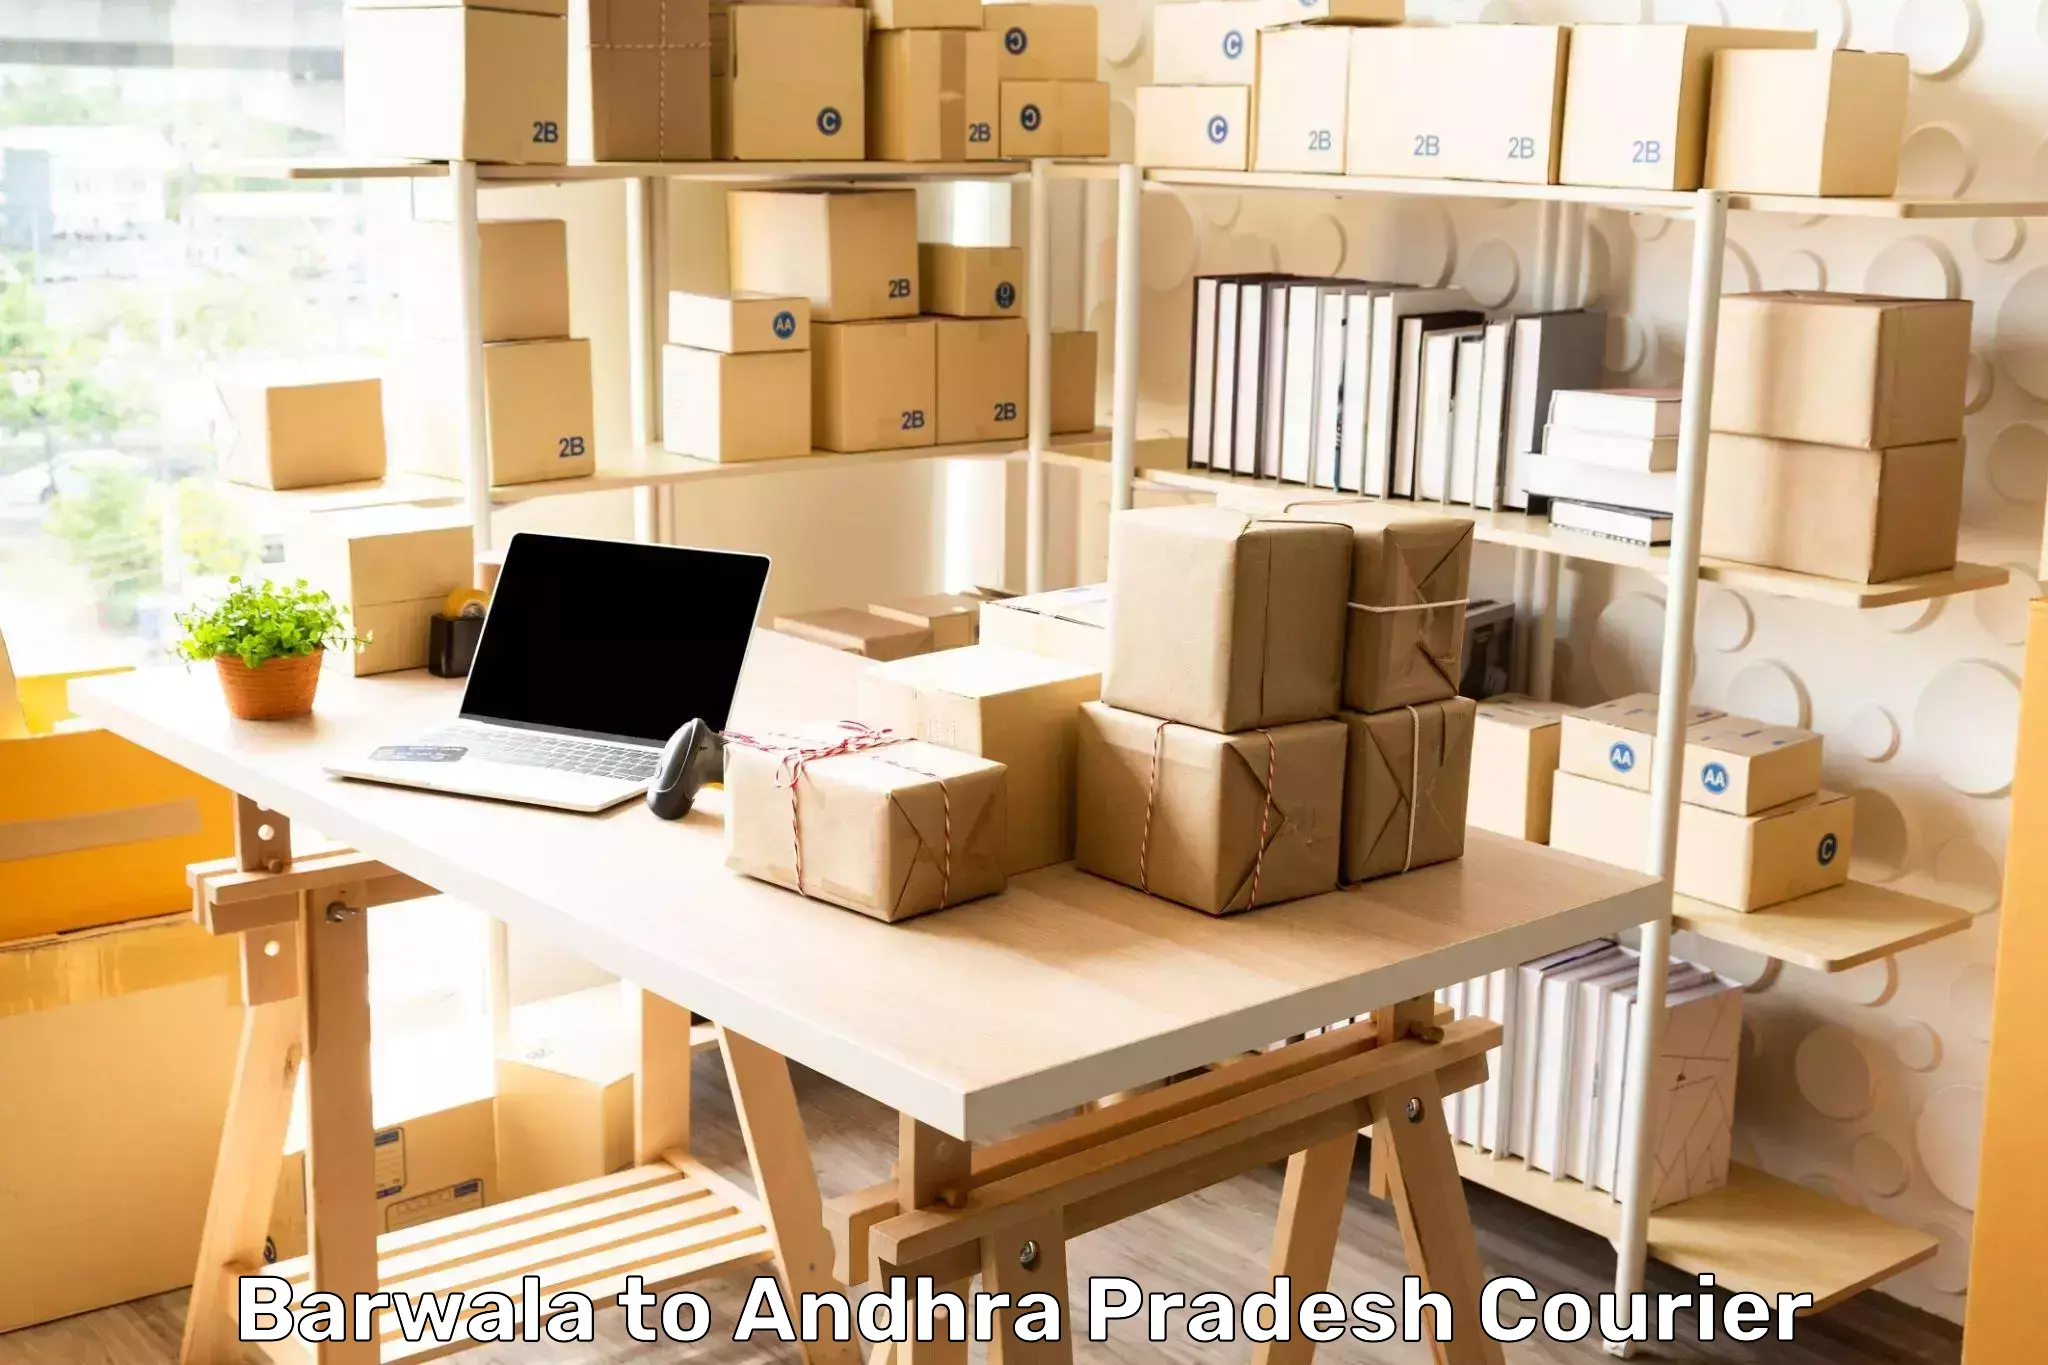 Personal courier services in Barwala to Andhra Pradesh